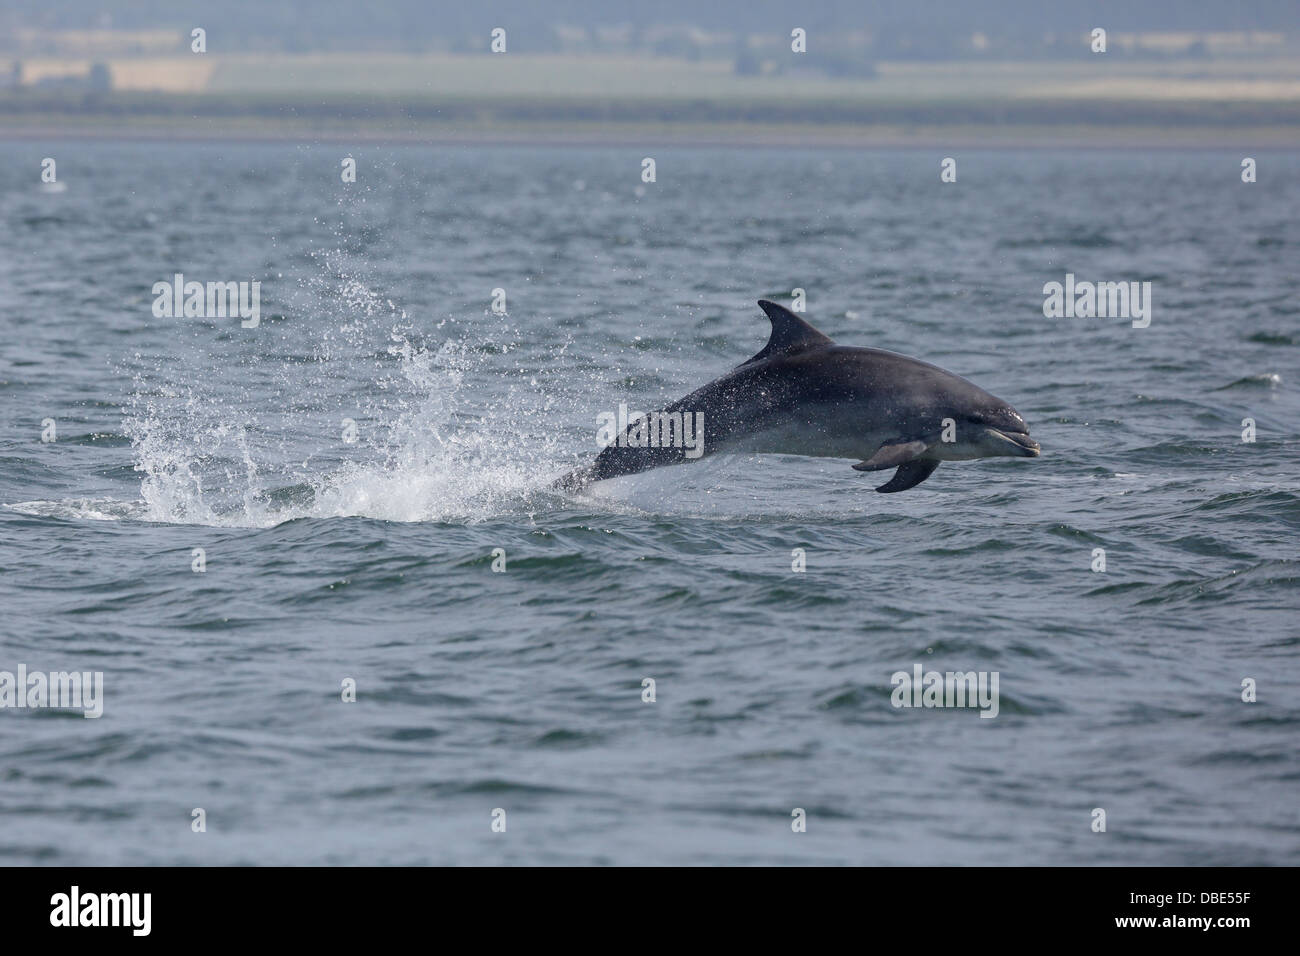 One Bottle-nosed Dolphin leaping out of the water at Chanonry Point Stock Photo